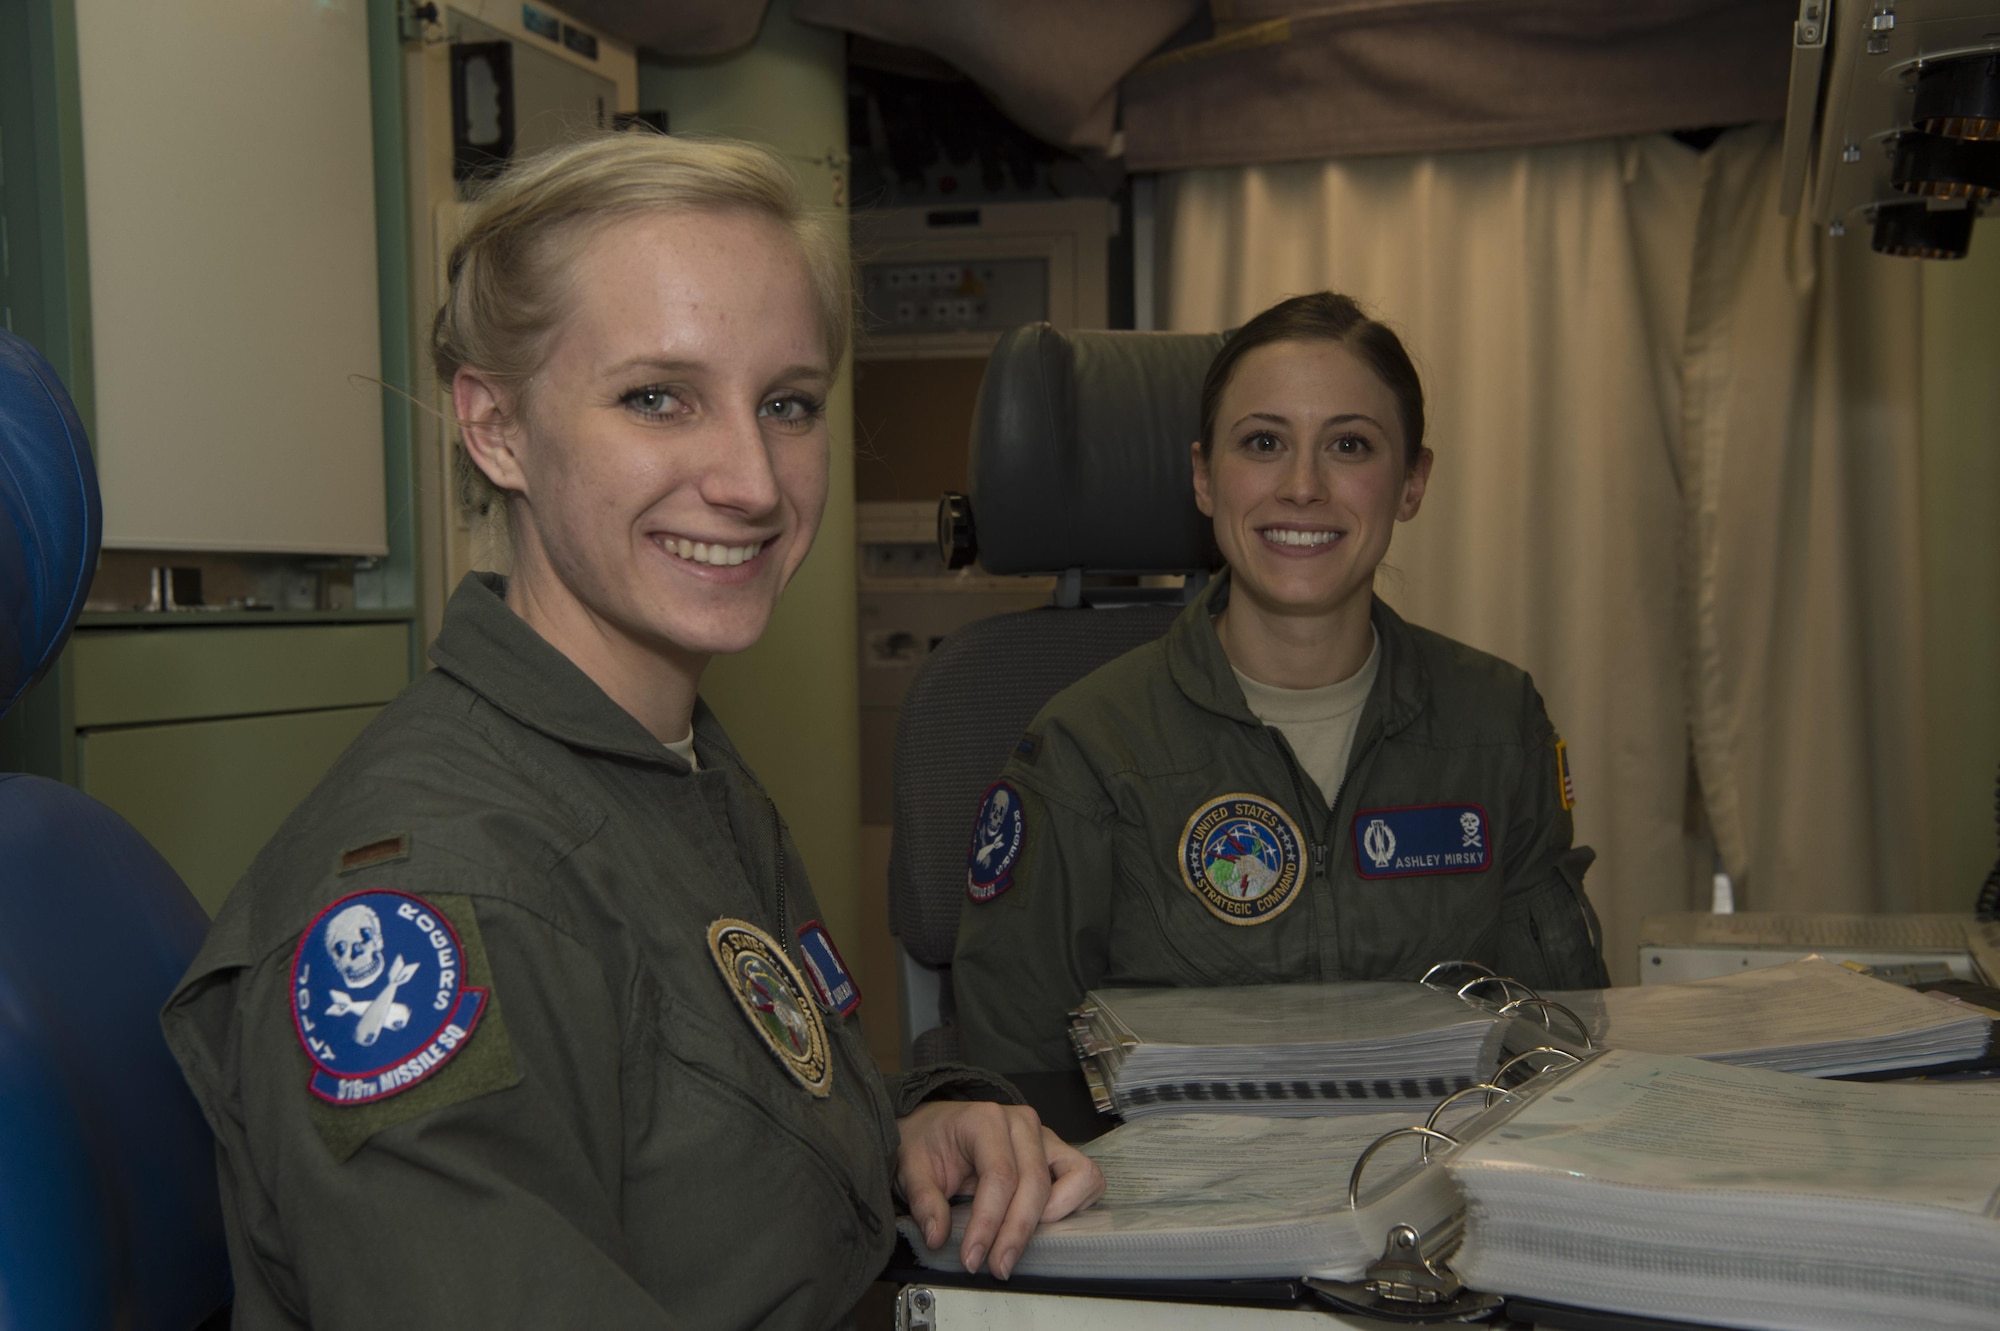 First Lt. Ashley Mirsky, 319th Missile Squadron missile combat crew commander, and 2nd Lt. Marie Blair, 319th MS deputy missile combat crew commander, pose for a photo in a launch control center in the 90th Missile Wing missile complex, Dec. 19, 2016. They have established an effective team dynamic by focusing on the positive attributes each brings to their partnership. (U.S. Air Force photo by 1st Lt. Veronica Perez)